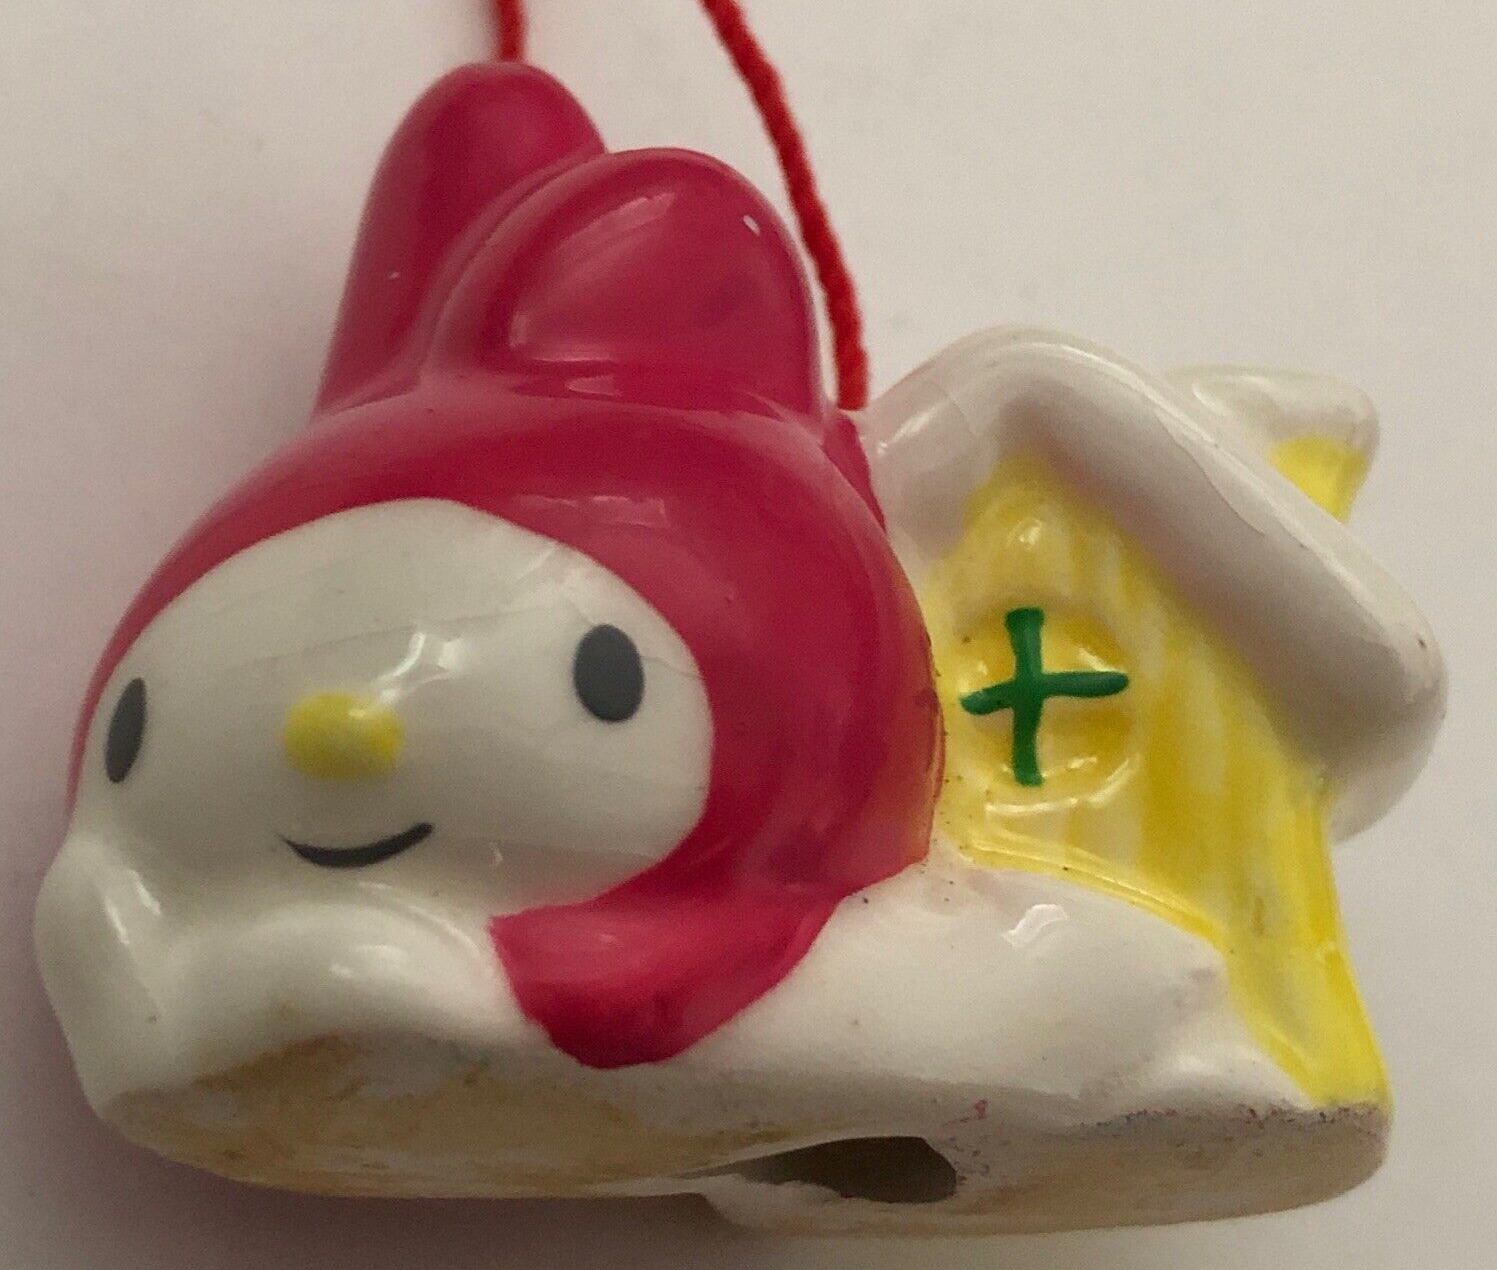 Vintage Pre-Owned Sanrio My Melody Ceramic Ornament Made In Taiwan 1978